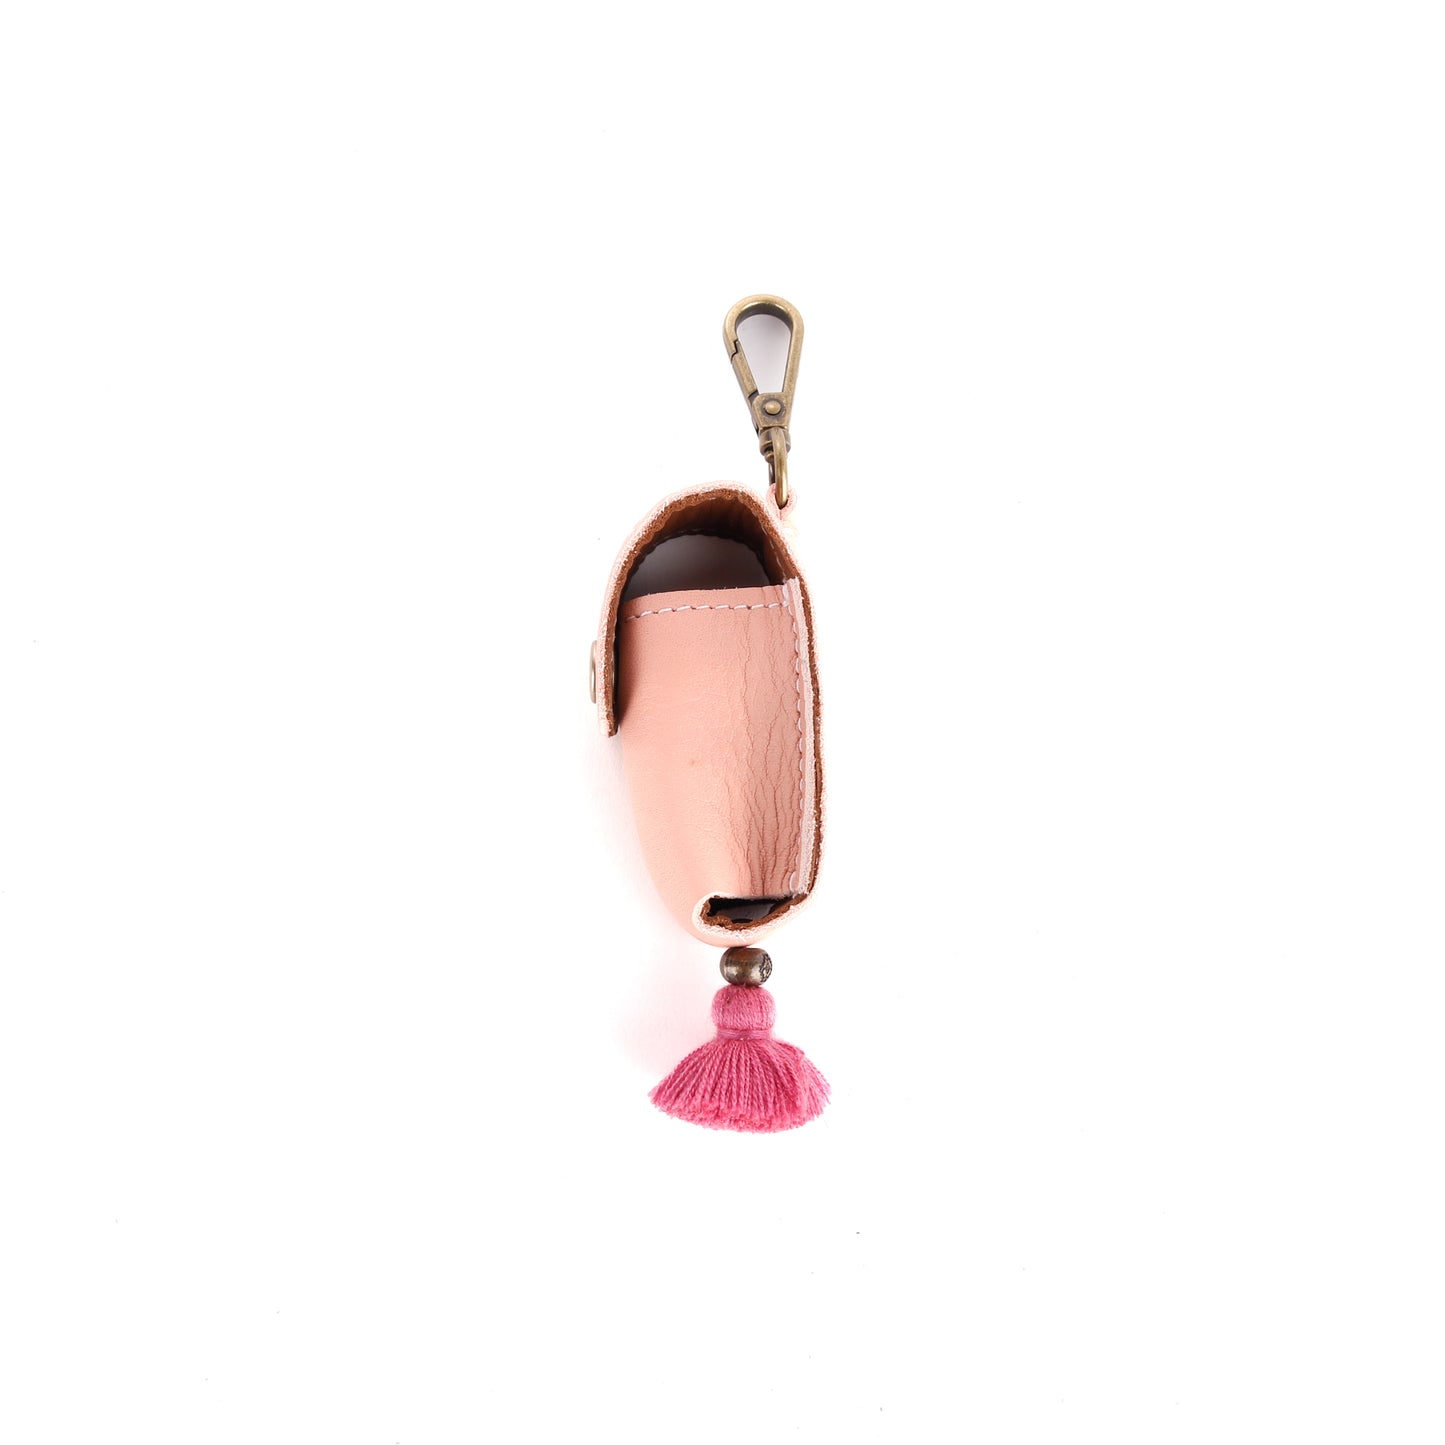 LIPSTICK CHARM - BREAST CANCER AWARENESS CAPSULE - ROSE PINK